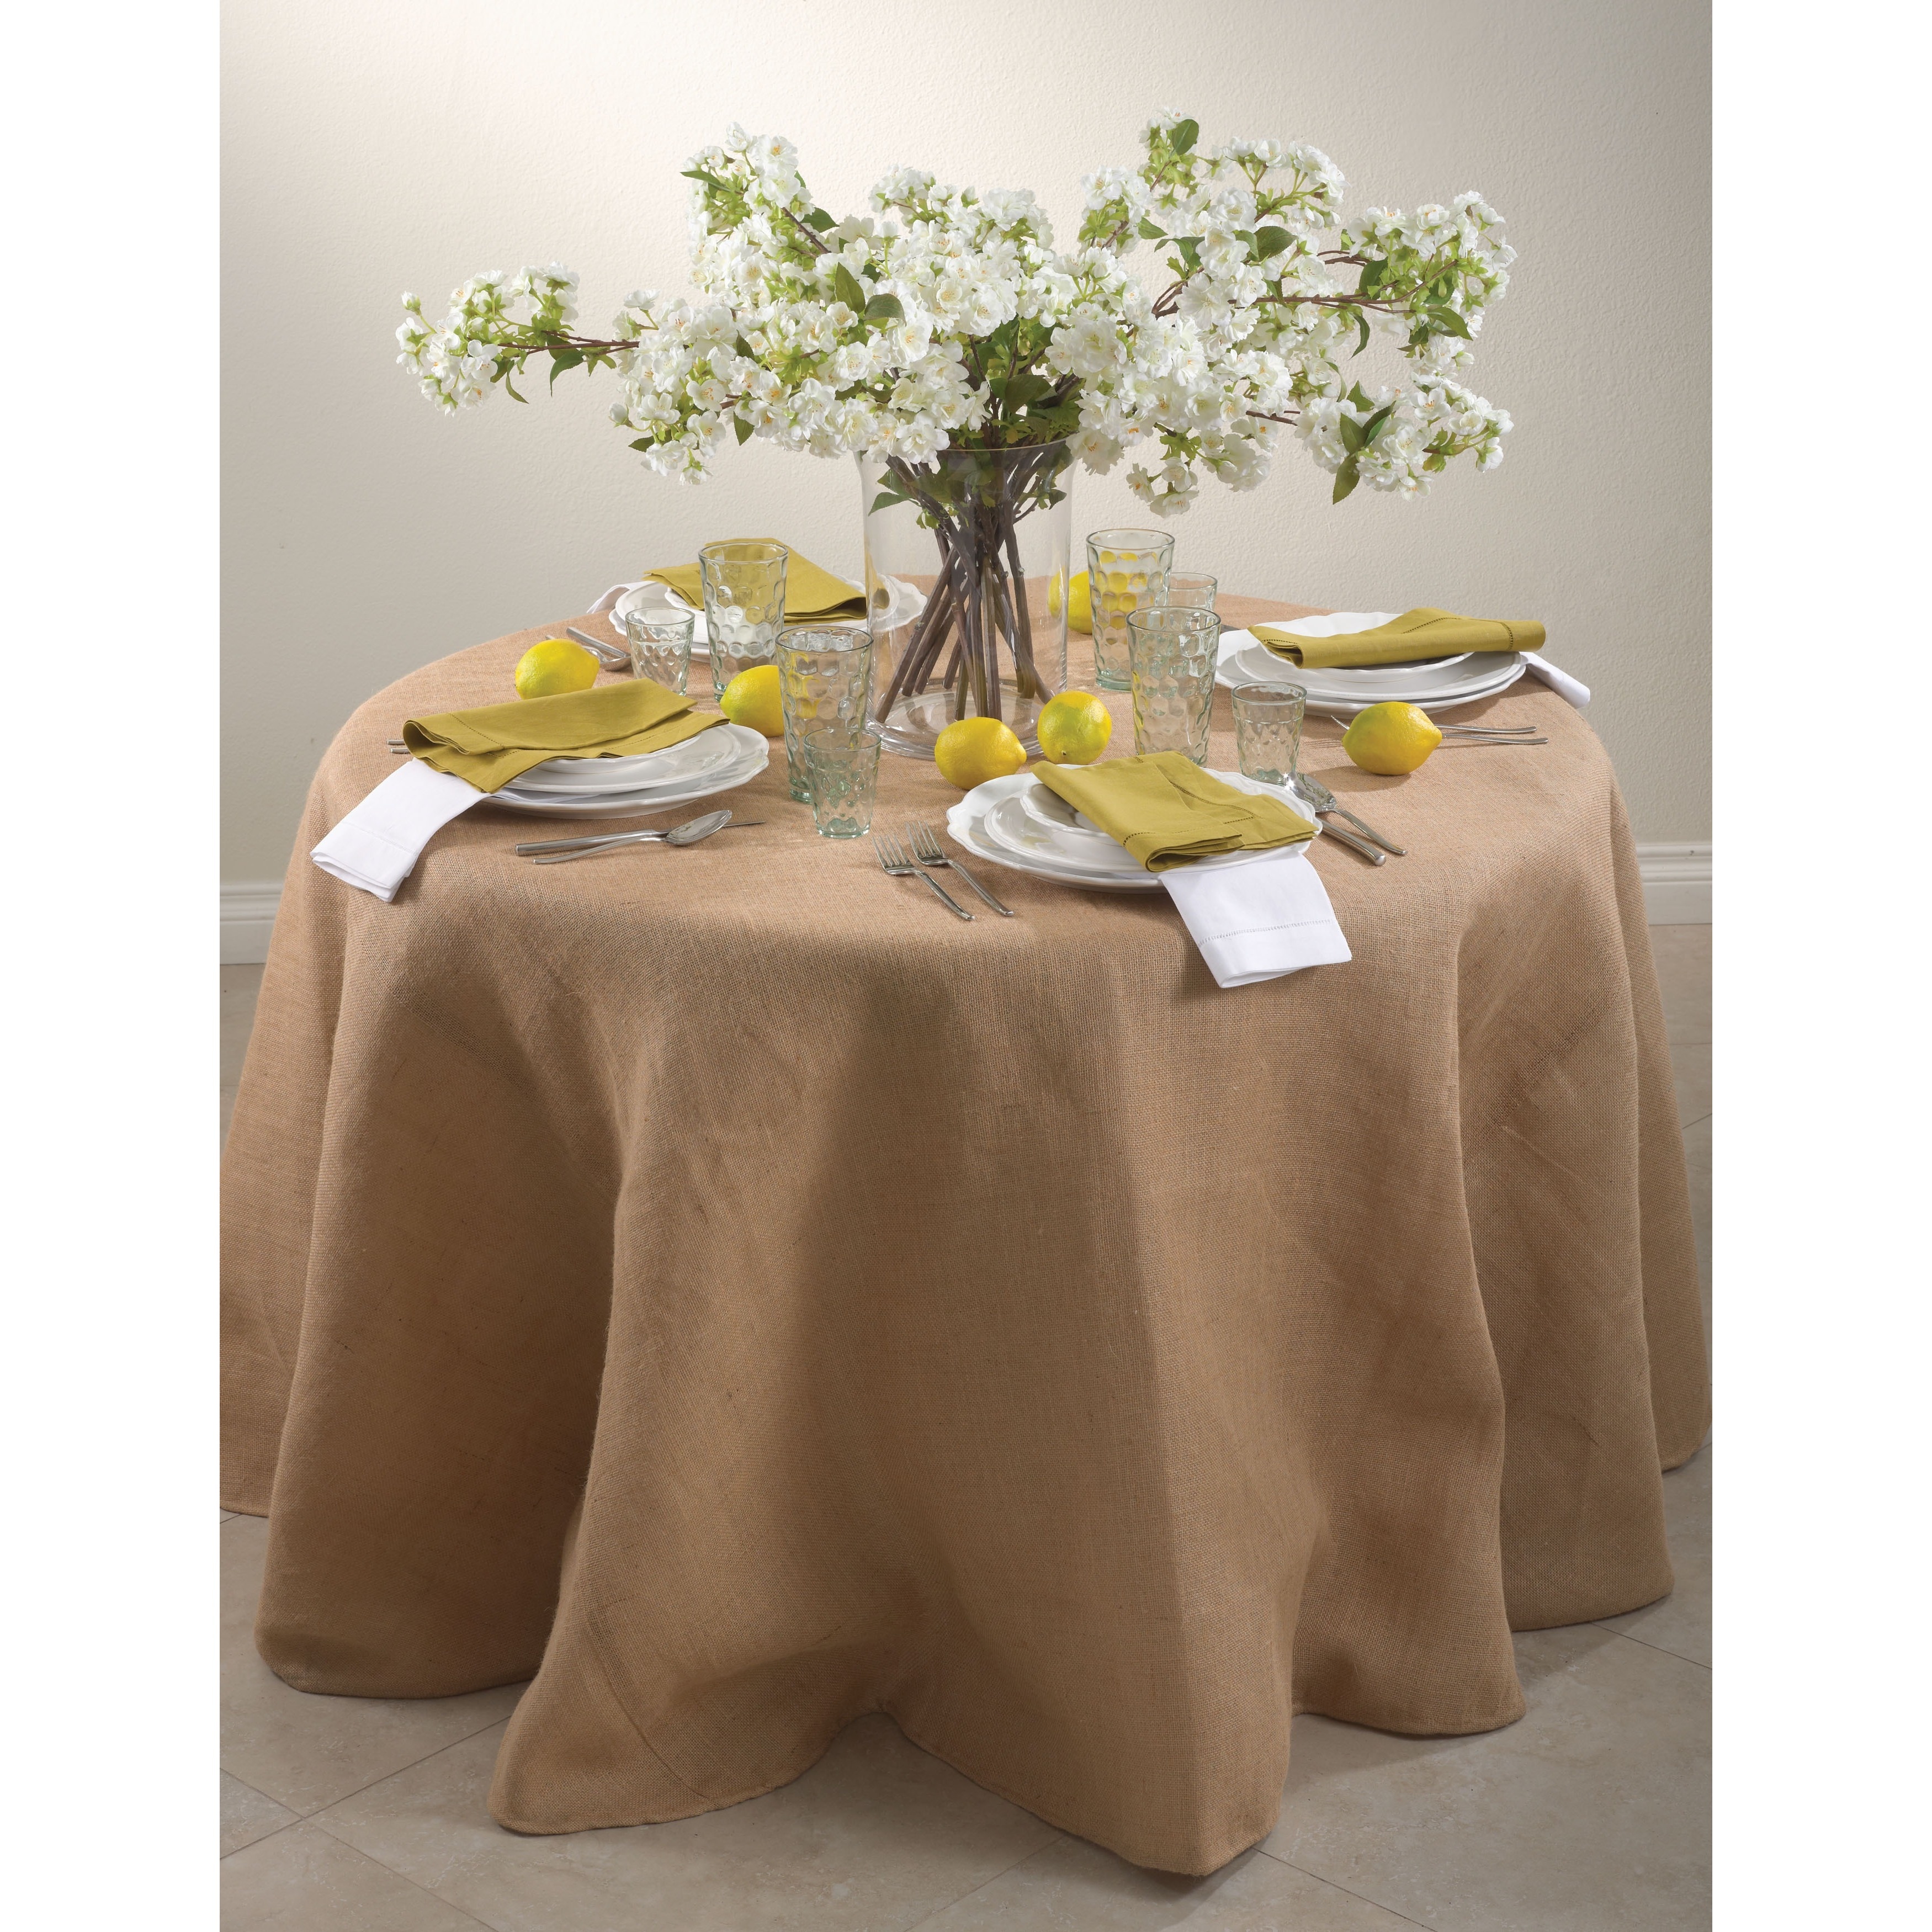 Tablecloth Burlap Natural Round 83 Inch By Broward Linens